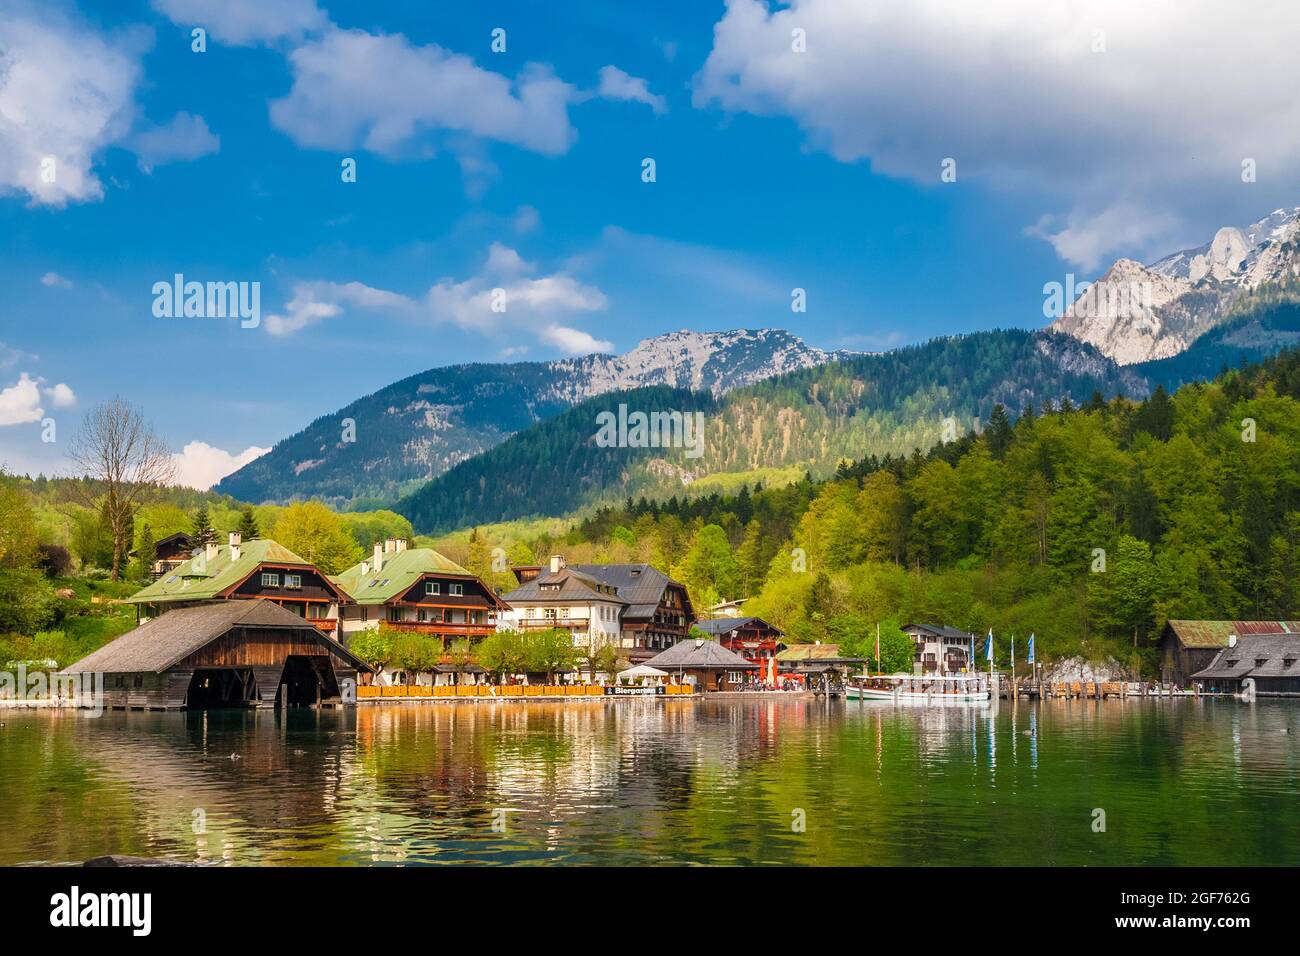 Gorgeous panoramic view of the municipality Schönau am Königssee with traditional Bavarian houses, boathouses, a boat at the pier of the lake and the... Stock Photo